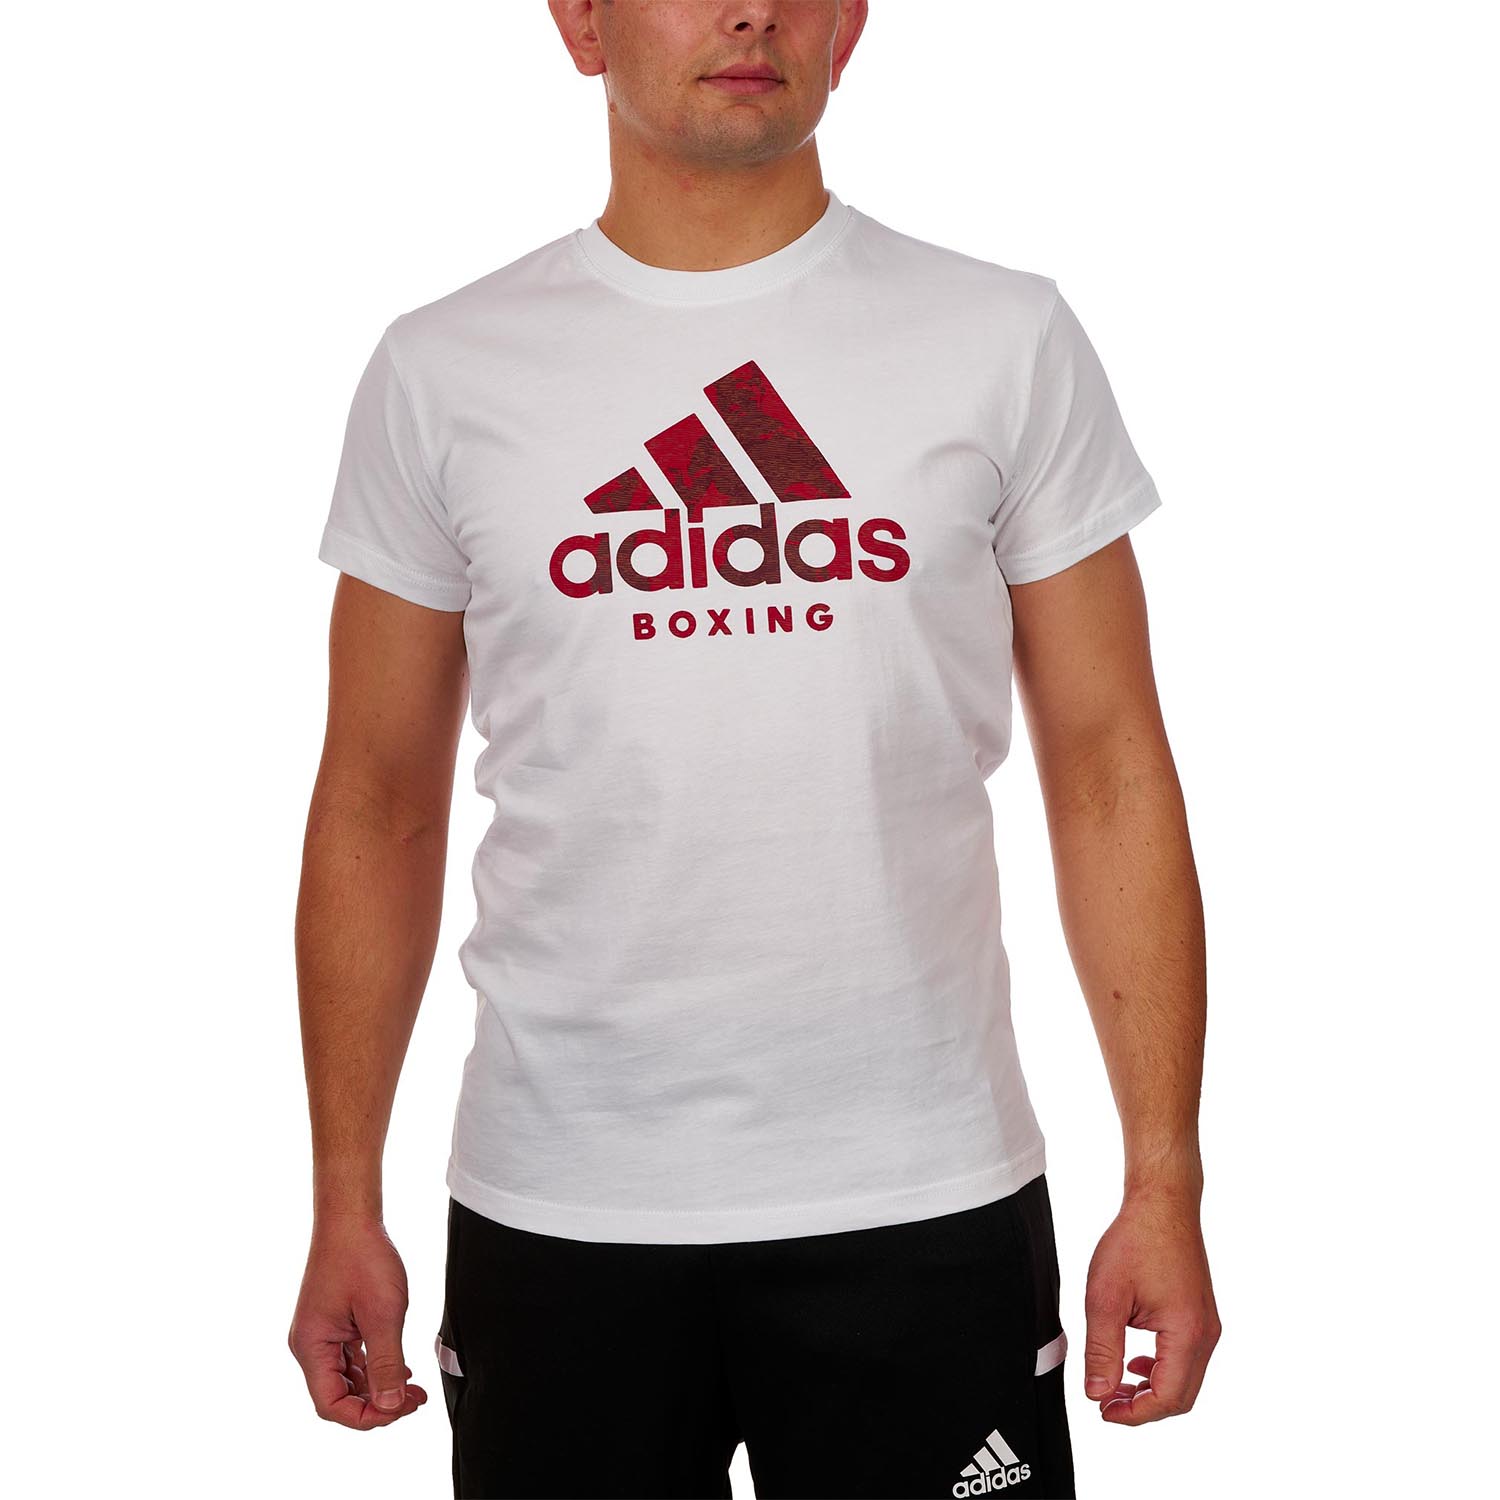 adidas T-Shirt, Badge Of Sport, Boxing, weiß, S